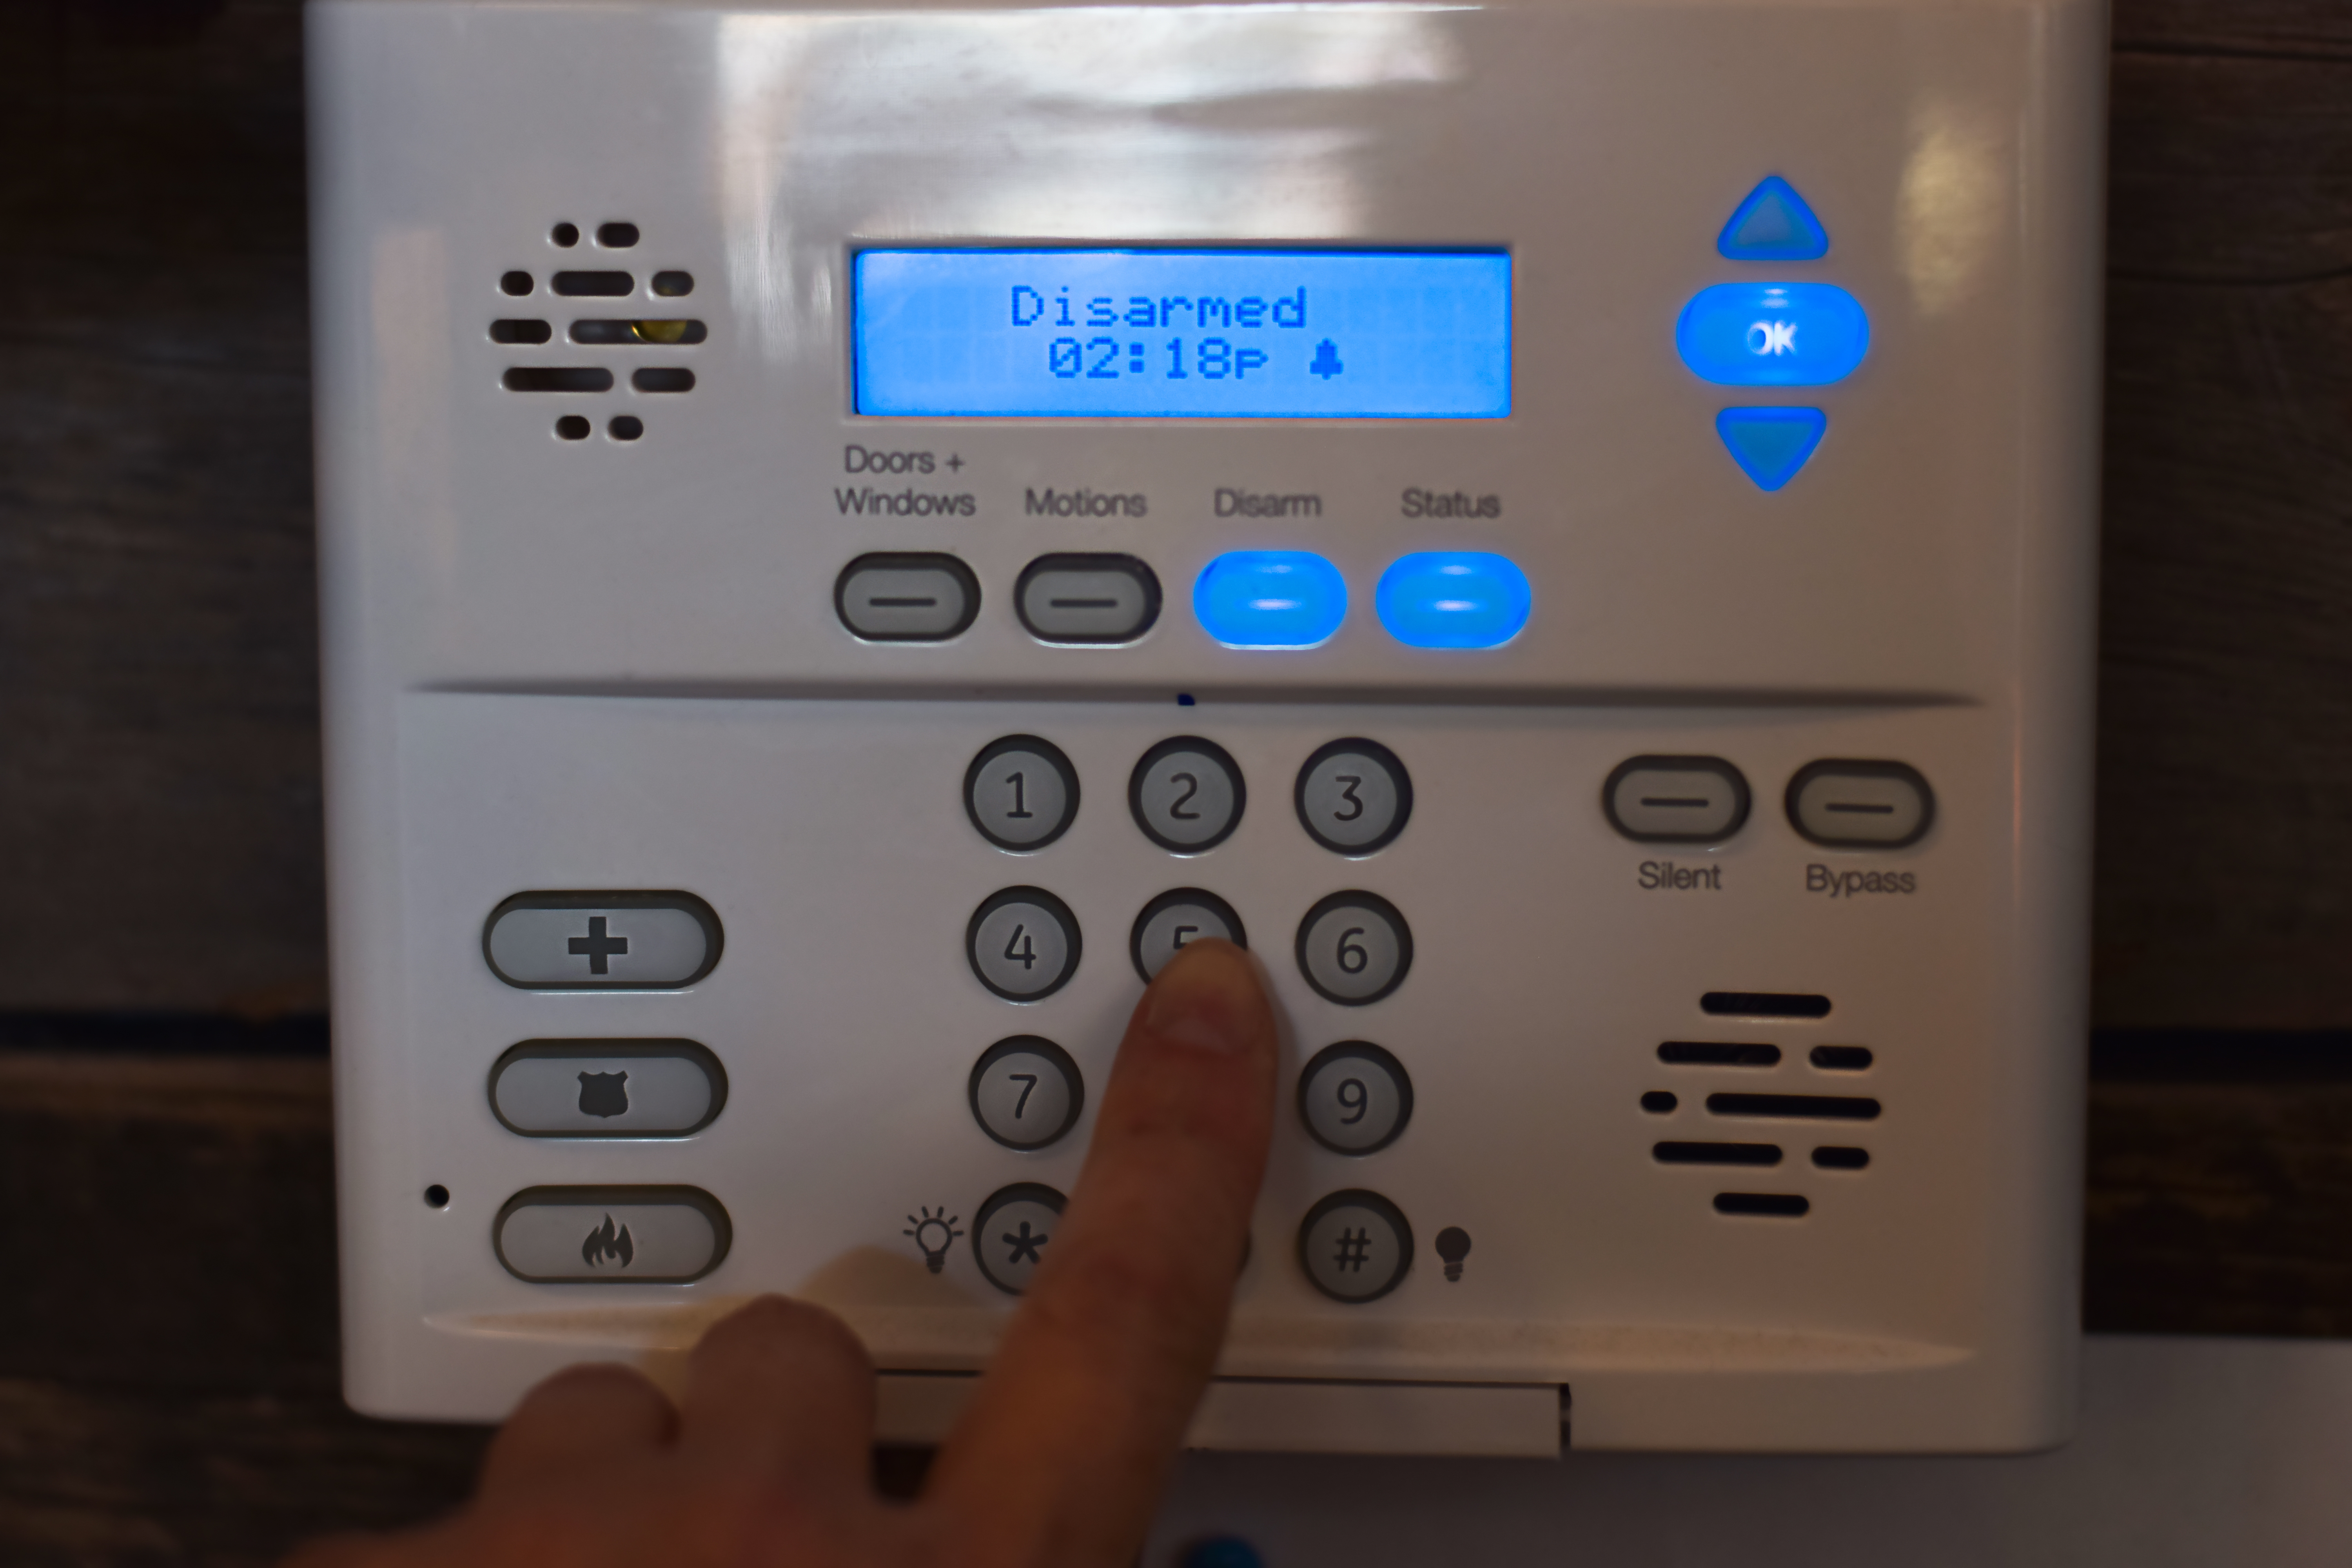 Simplisafe Home Security System in Durham NC | Home Security Devices